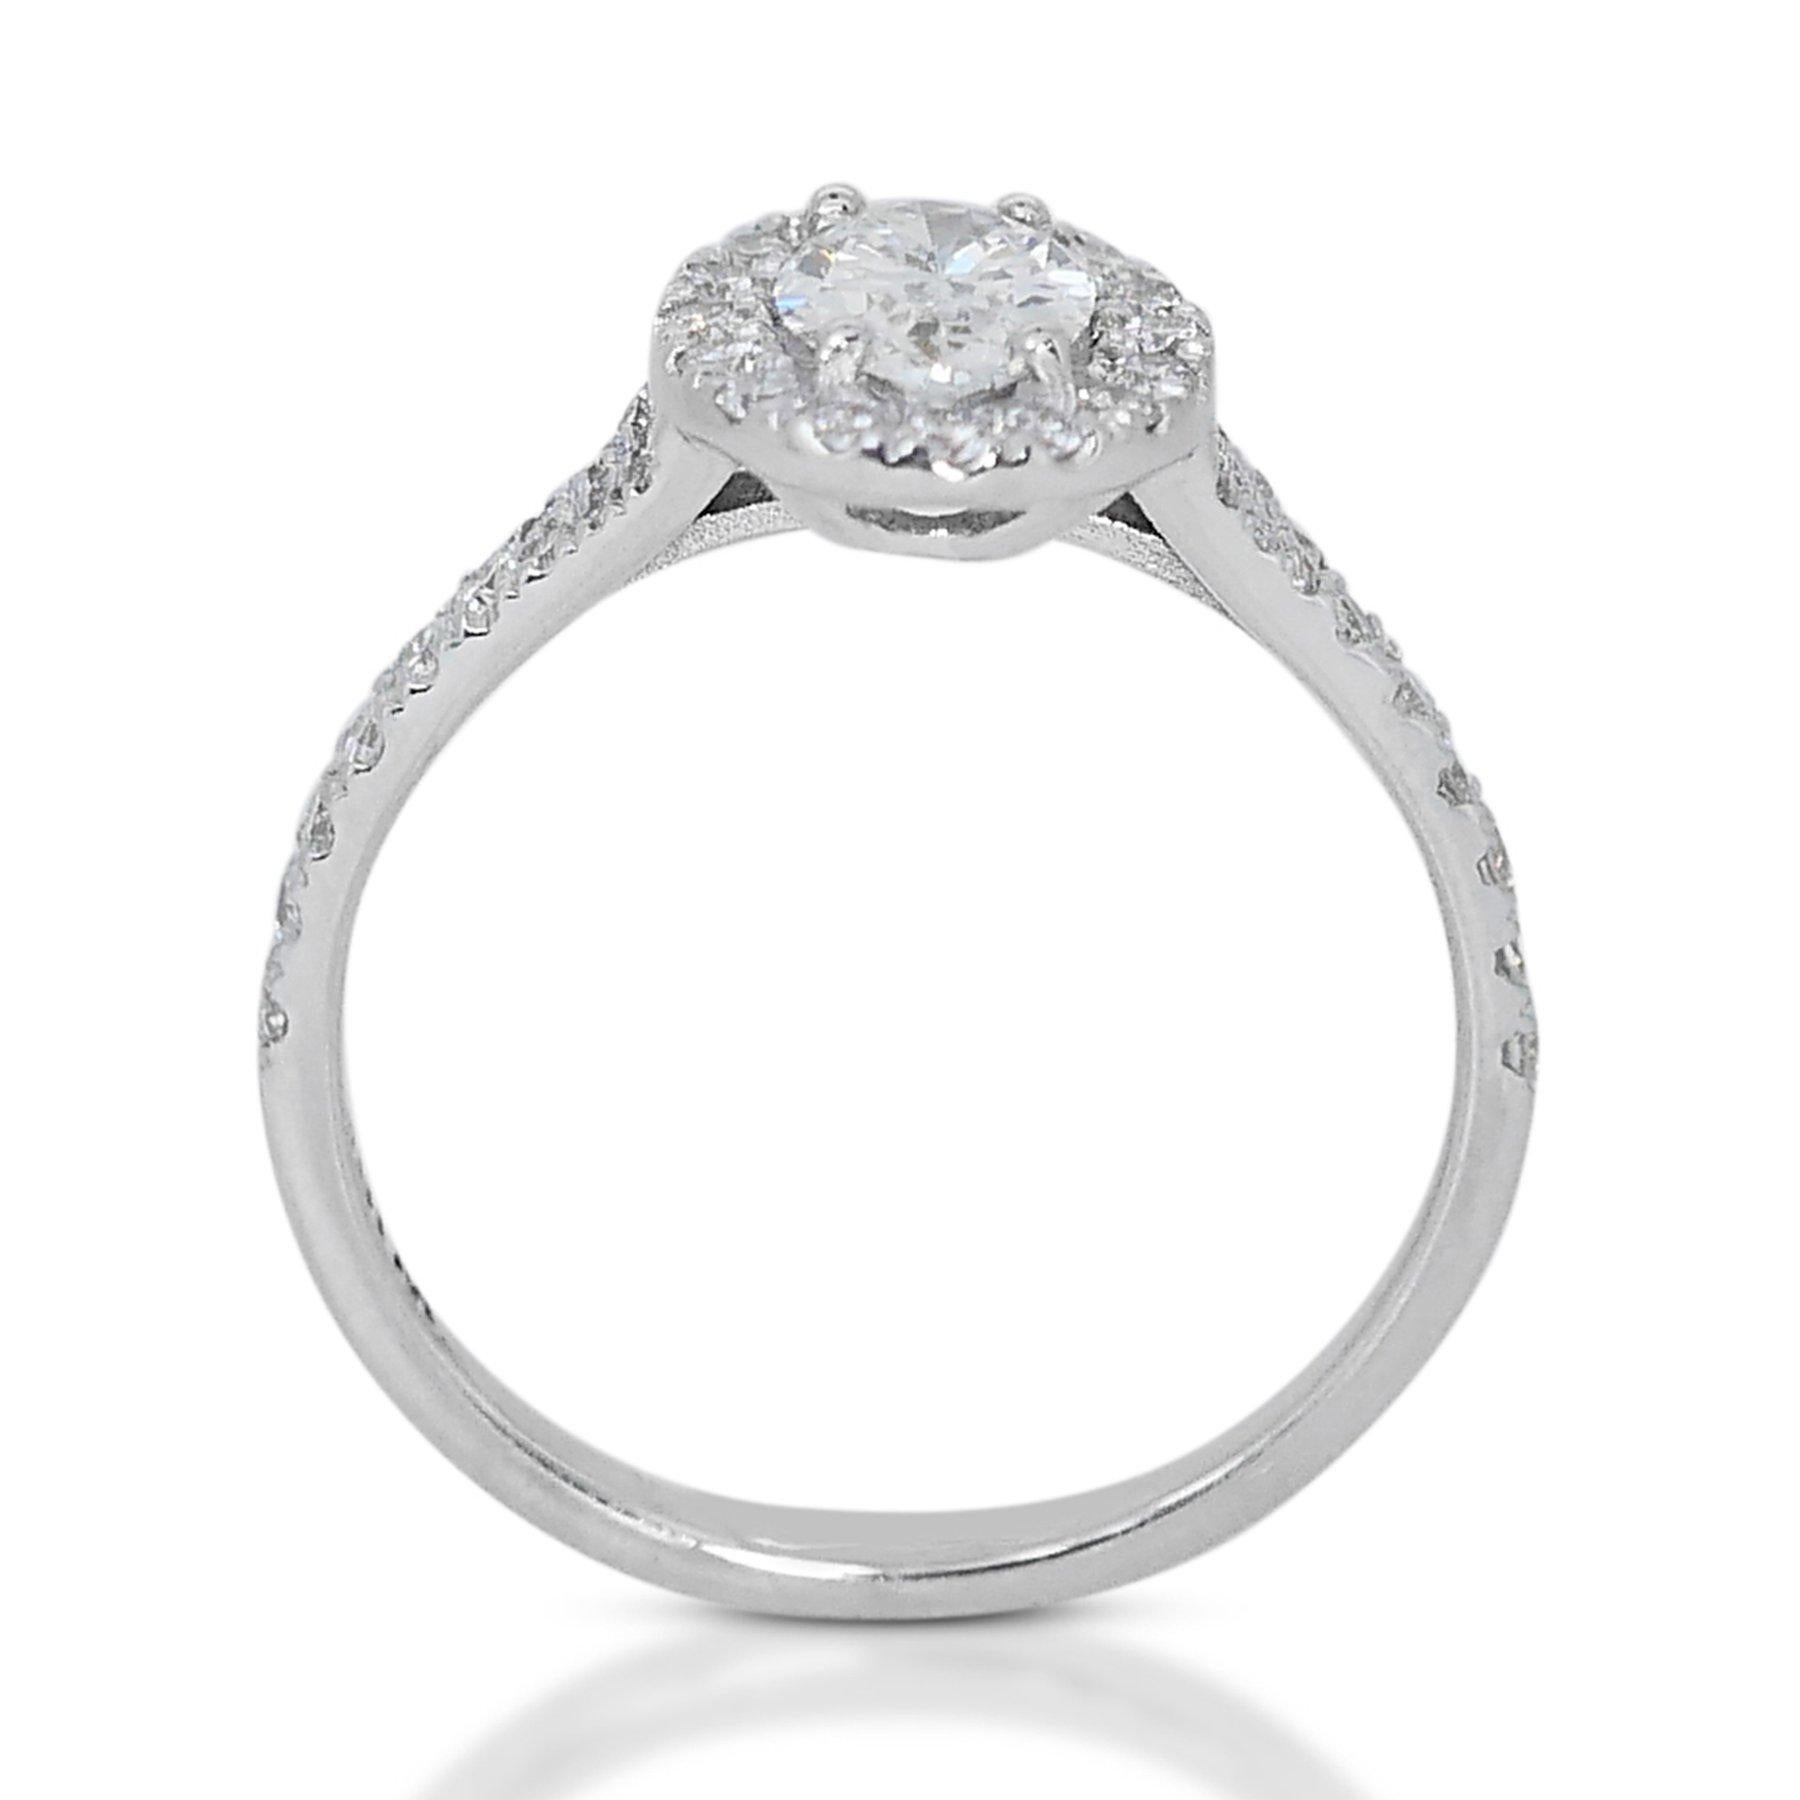 Exquisite 1.04ct Oval Diamond Halo Ring in 18k White Gold - GIA Certified In New Condition For Sale In רמת גן, IL